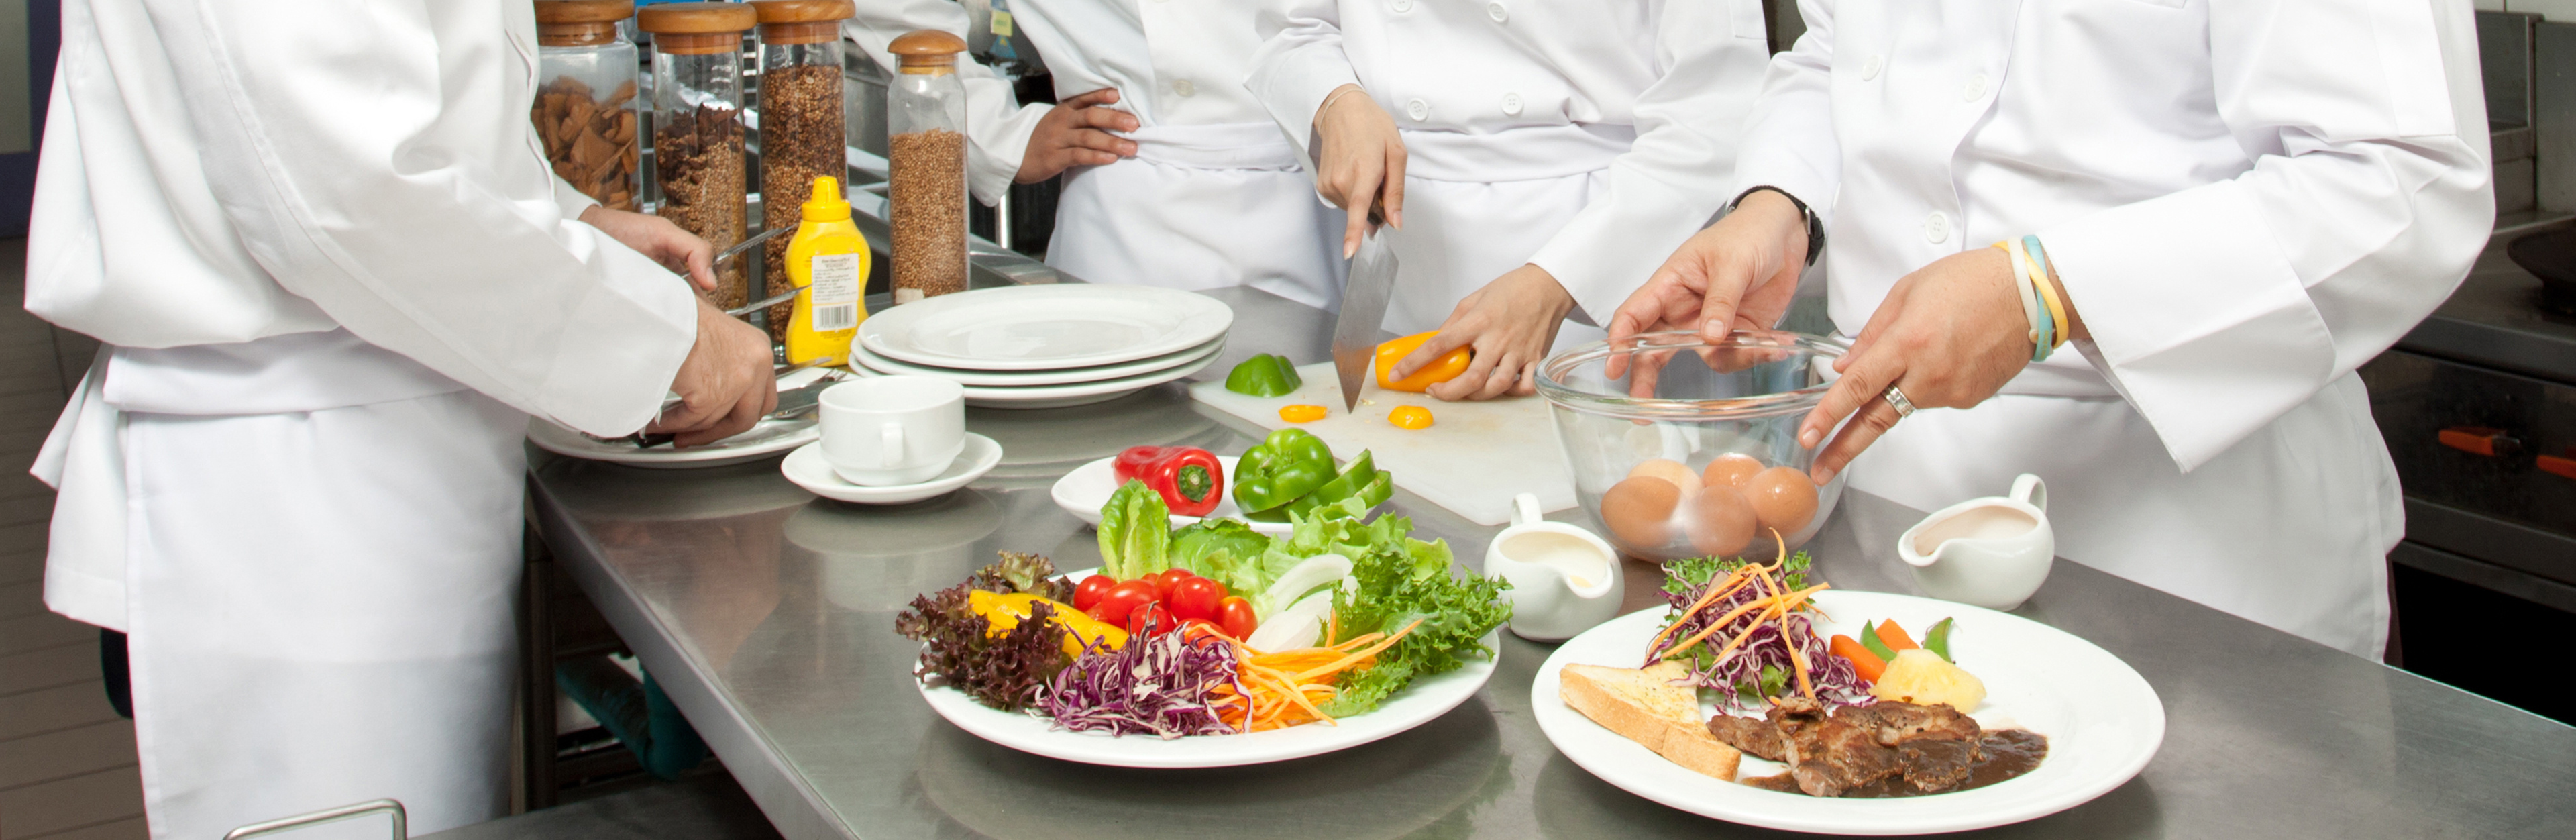 Food Safety Training & Certificate  Online Food Handler Courses Available